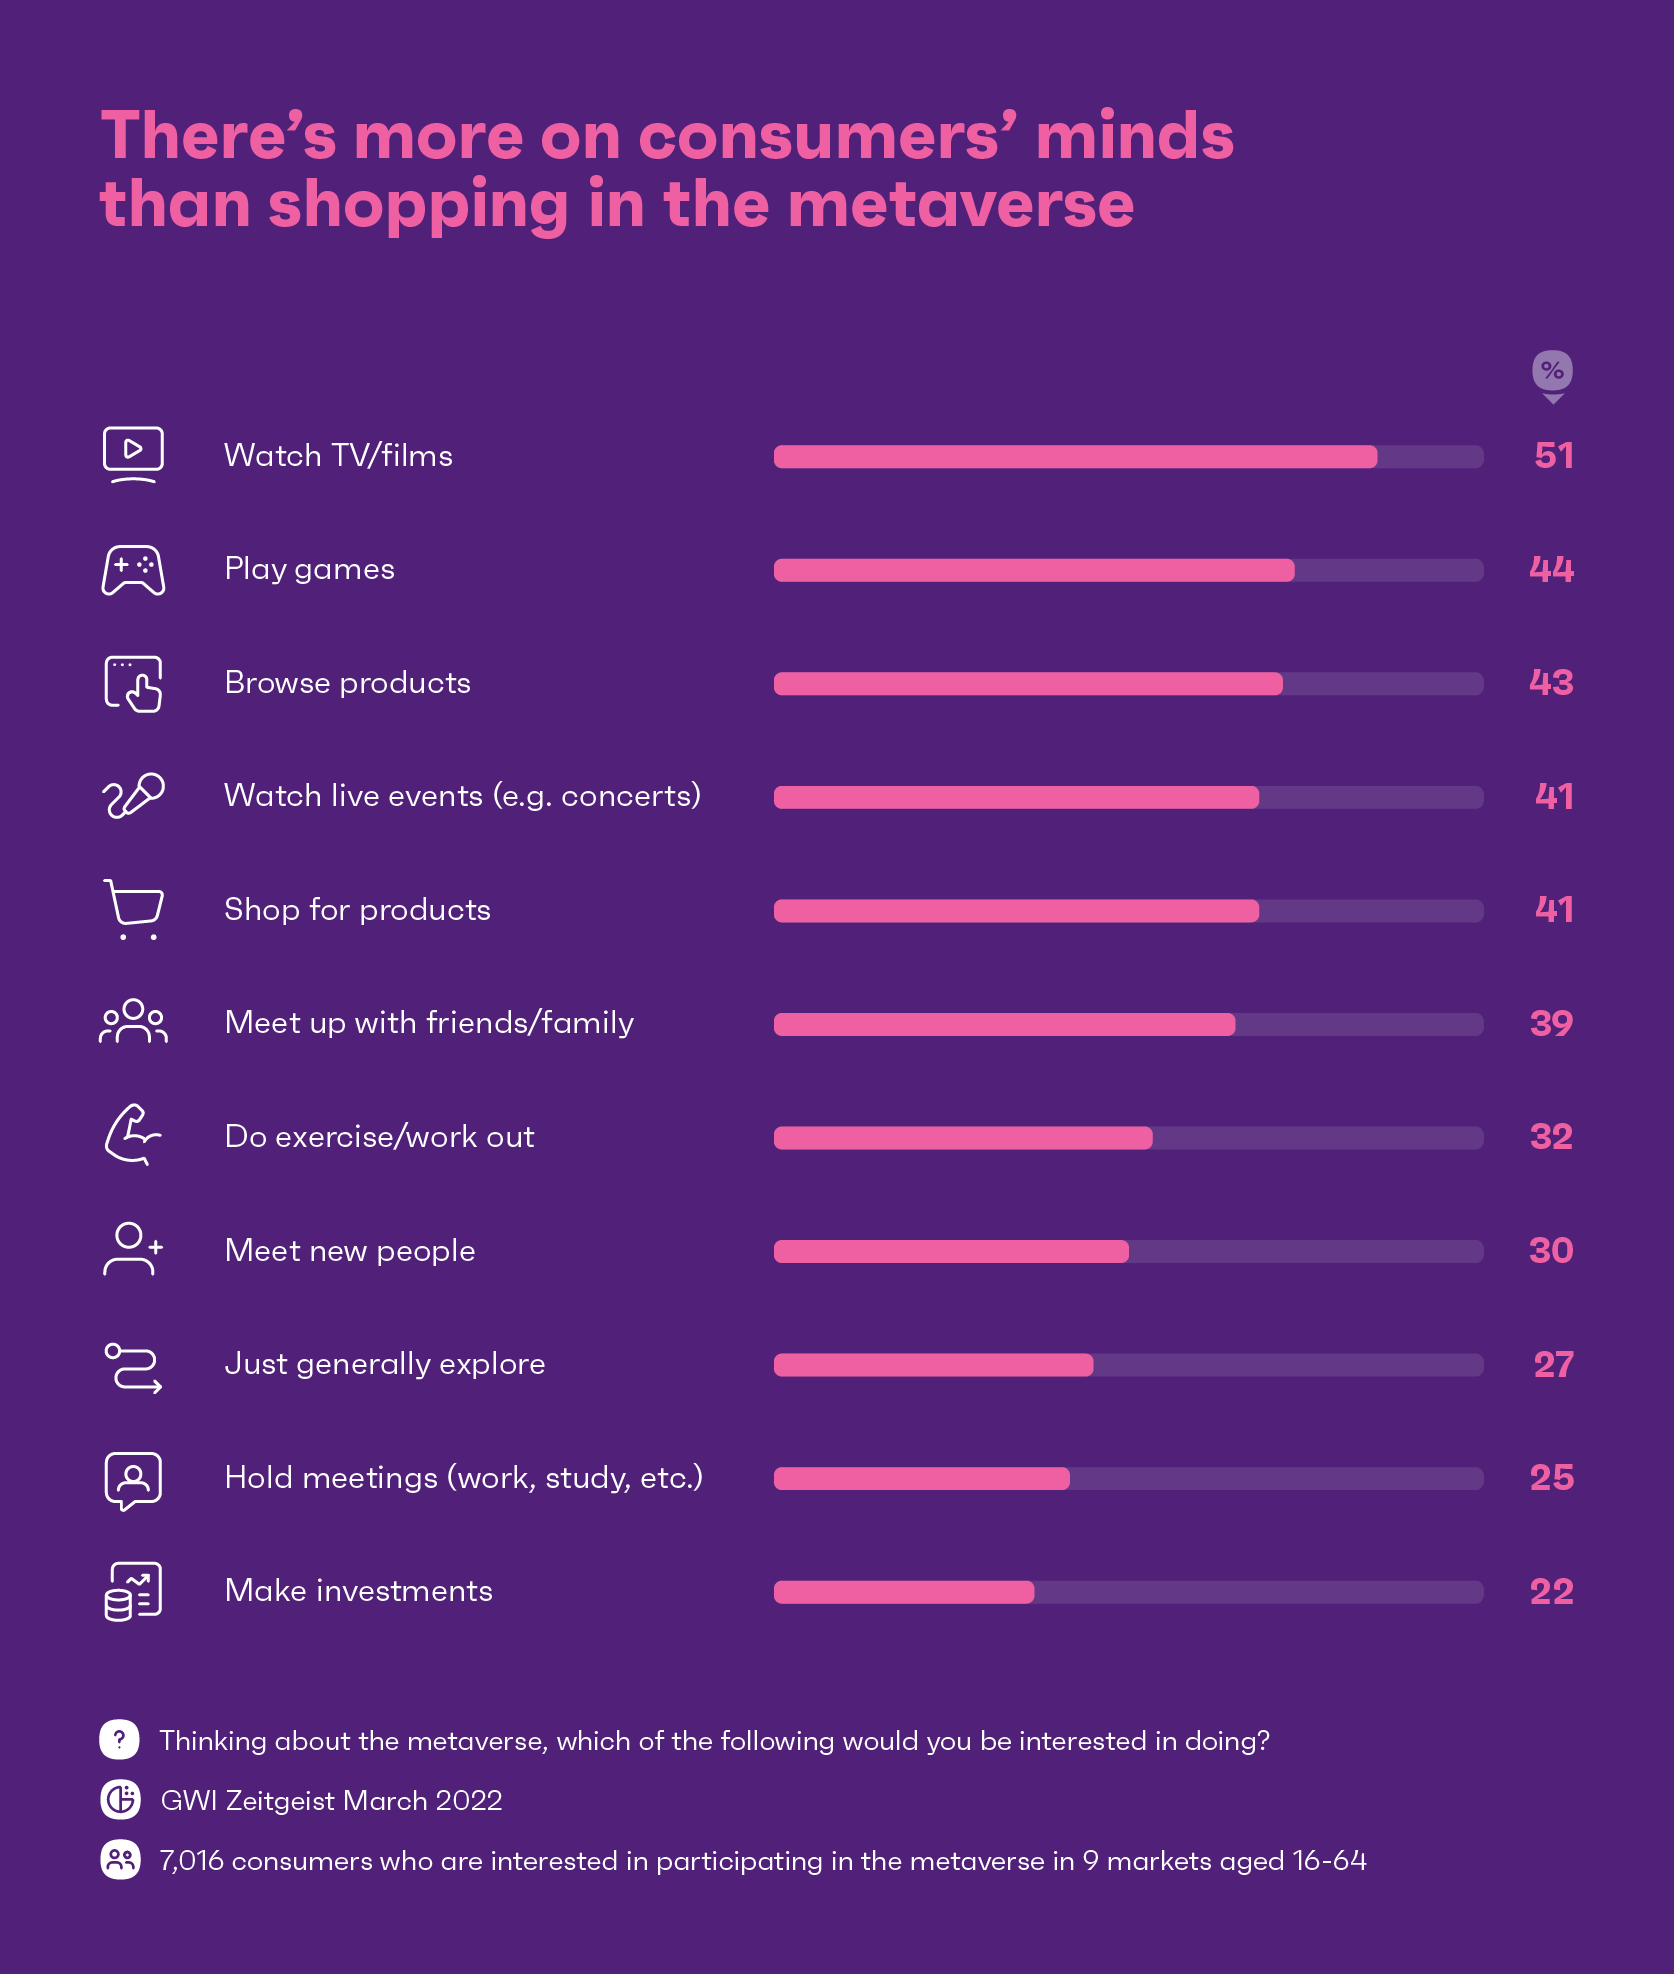 There's more on consumers' minds than shopping in the metaverse.